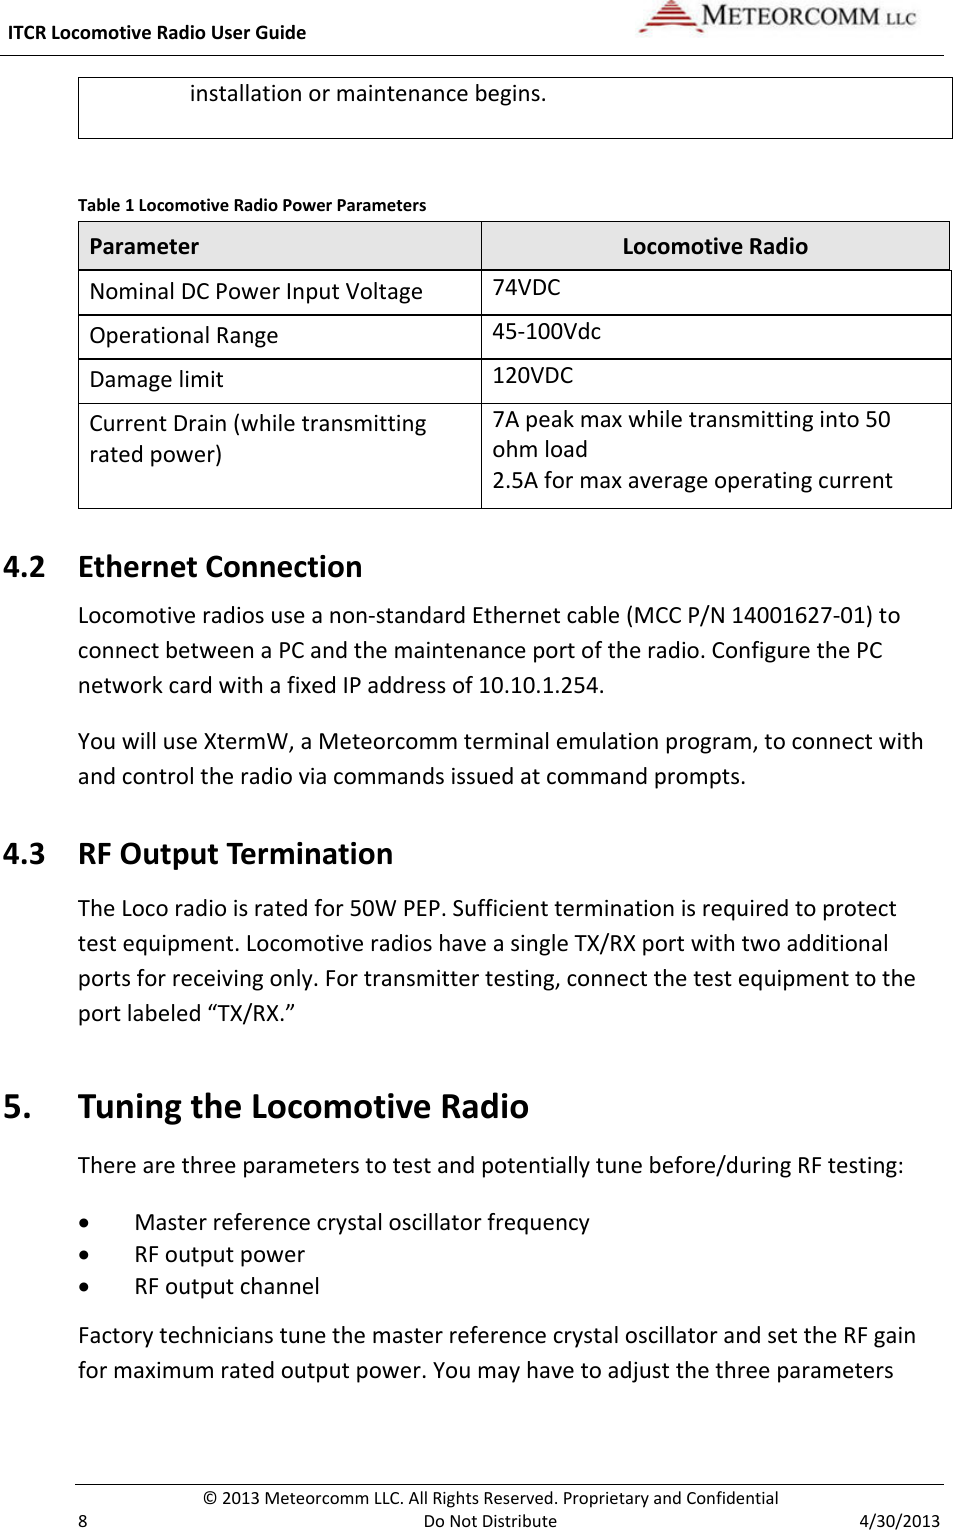  ITCR Locomotive Radio User Guide    © 2013 Meteorcomm LLC. All Rights Reserved. Proprietary and Confidential   8  Do Not Distribute  4/30/2013 installation or maintenance begins.   Table 1 Locomotive Radio Power Parameters Parameter Locomotive Radio Nominal DC Power Input Voltage 74VDC Operational Range 45-100Vdc Damage limit 120VDC Current Drain (while transmitting rated power) 7A peak max while transmitting into 50 ohm load  2.5A for max average operating current 4.2 Ethernet Connection Locomotive radios use a non-standard Ethernet cable (MCC P/N 14001627-01) to connect between a PC and the maintenance port of the radio. Configure the PC network card with a fixed IP address of 10.10.1.254.  You will use XtermW, a Meteorcomm terminal emulation program, to connect with and control the radio via commands issued at command prompts.  4.3 RF Output Termination The Loco radio is rated for 50W PEP. Sufficient termination is required to protect test equipment. Locomotive radios have a single TX/RX port with two additional ports for receiving only. For transmitter testing, connect the test equipment to the port labeled “TX/RX.”  5. Tuning the Locomotive Radio There are three parameters to test and potentially tune before/during RF testing: • Master reference crystal oscillator frequency • RF output power • RF output channel Factory technicians tune the master reference crystal oscillator and set the RF gain for maximum rated output power. You may have to adjust the three parameters 